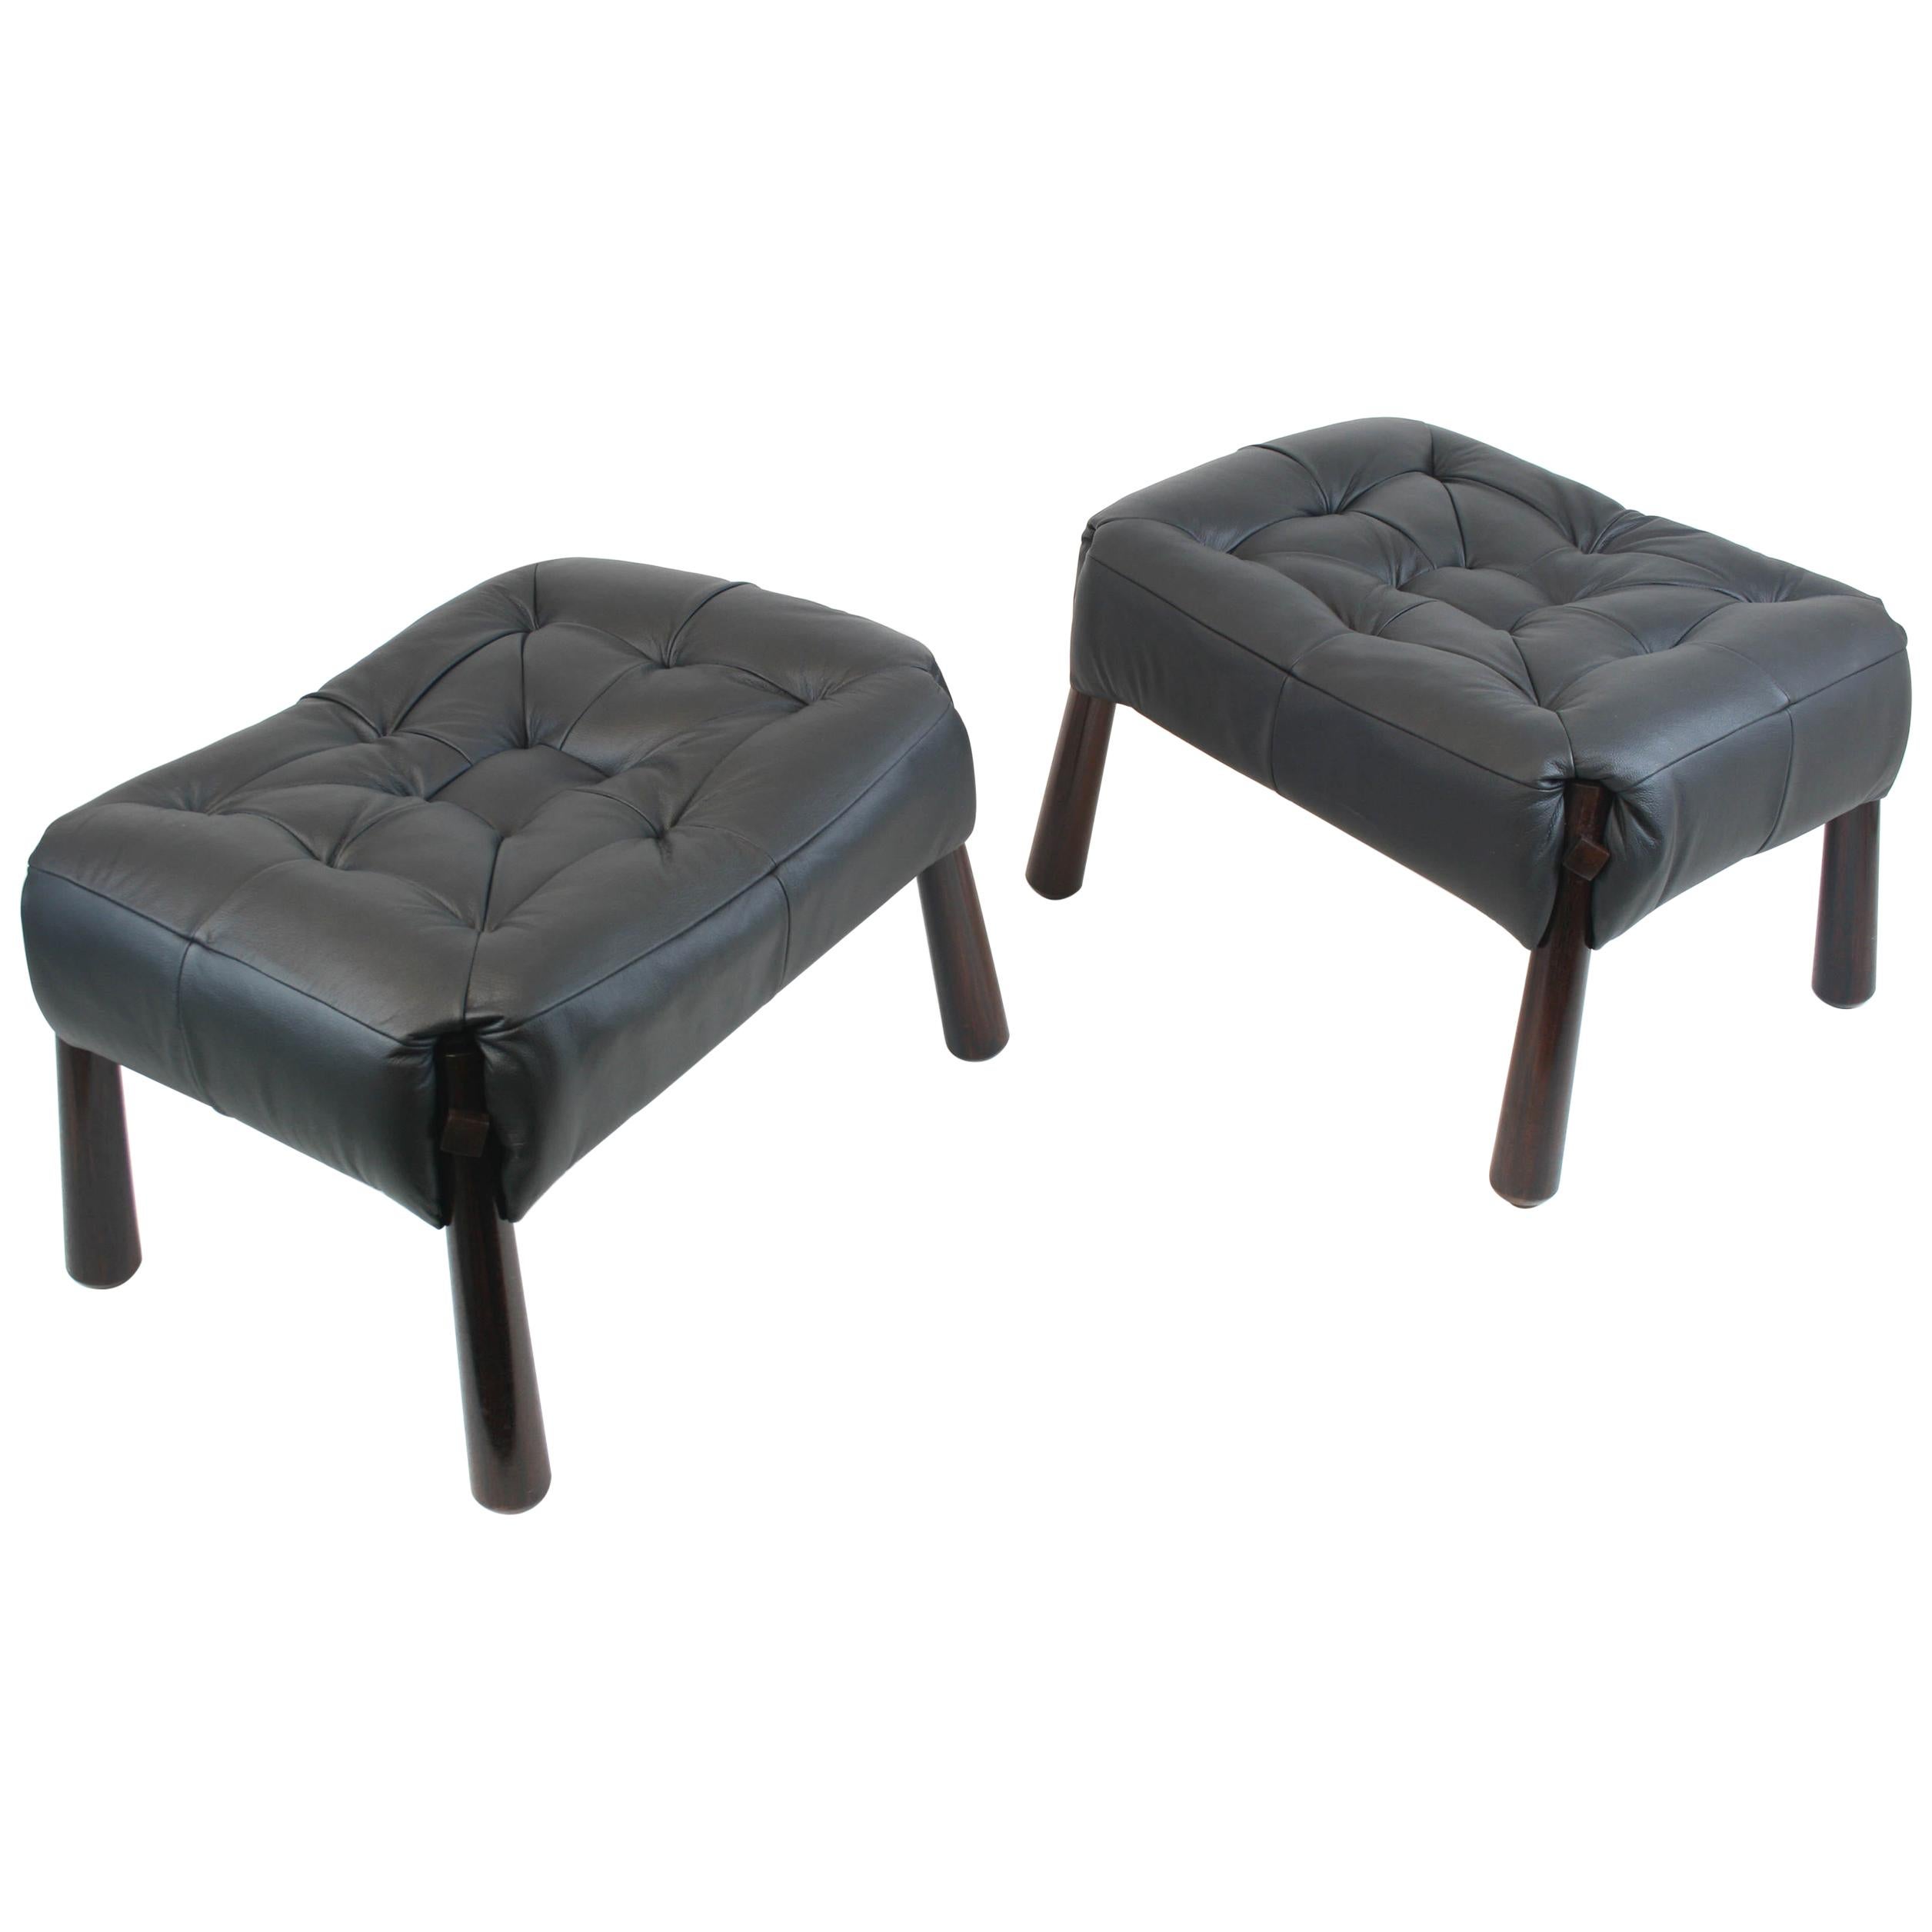 Pair of Stools by Percival Lafer